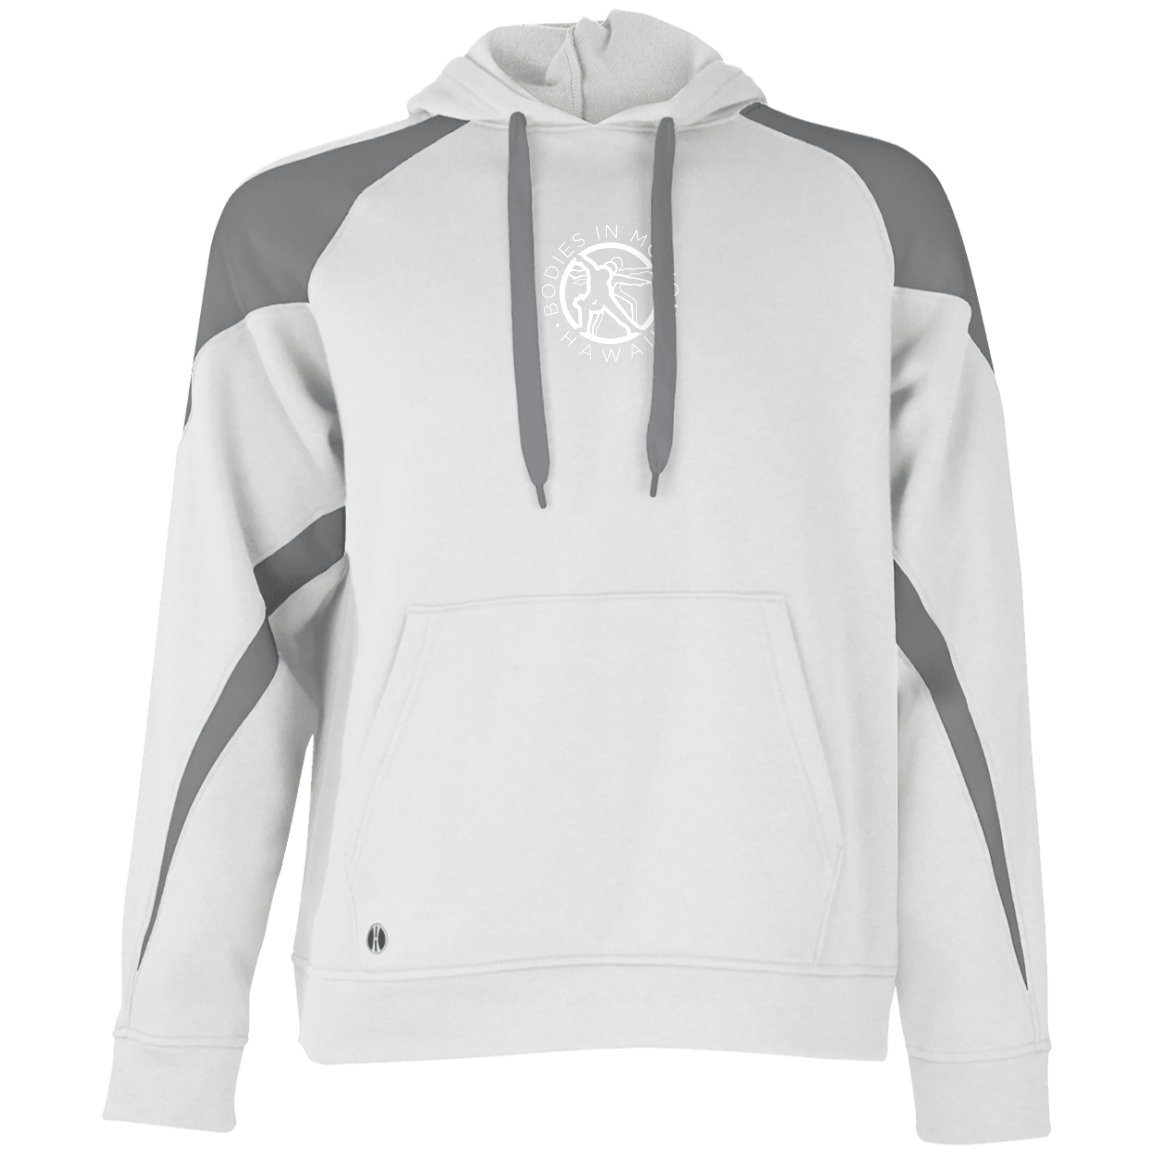 Bodies in Motion Hoodie - Many Colors